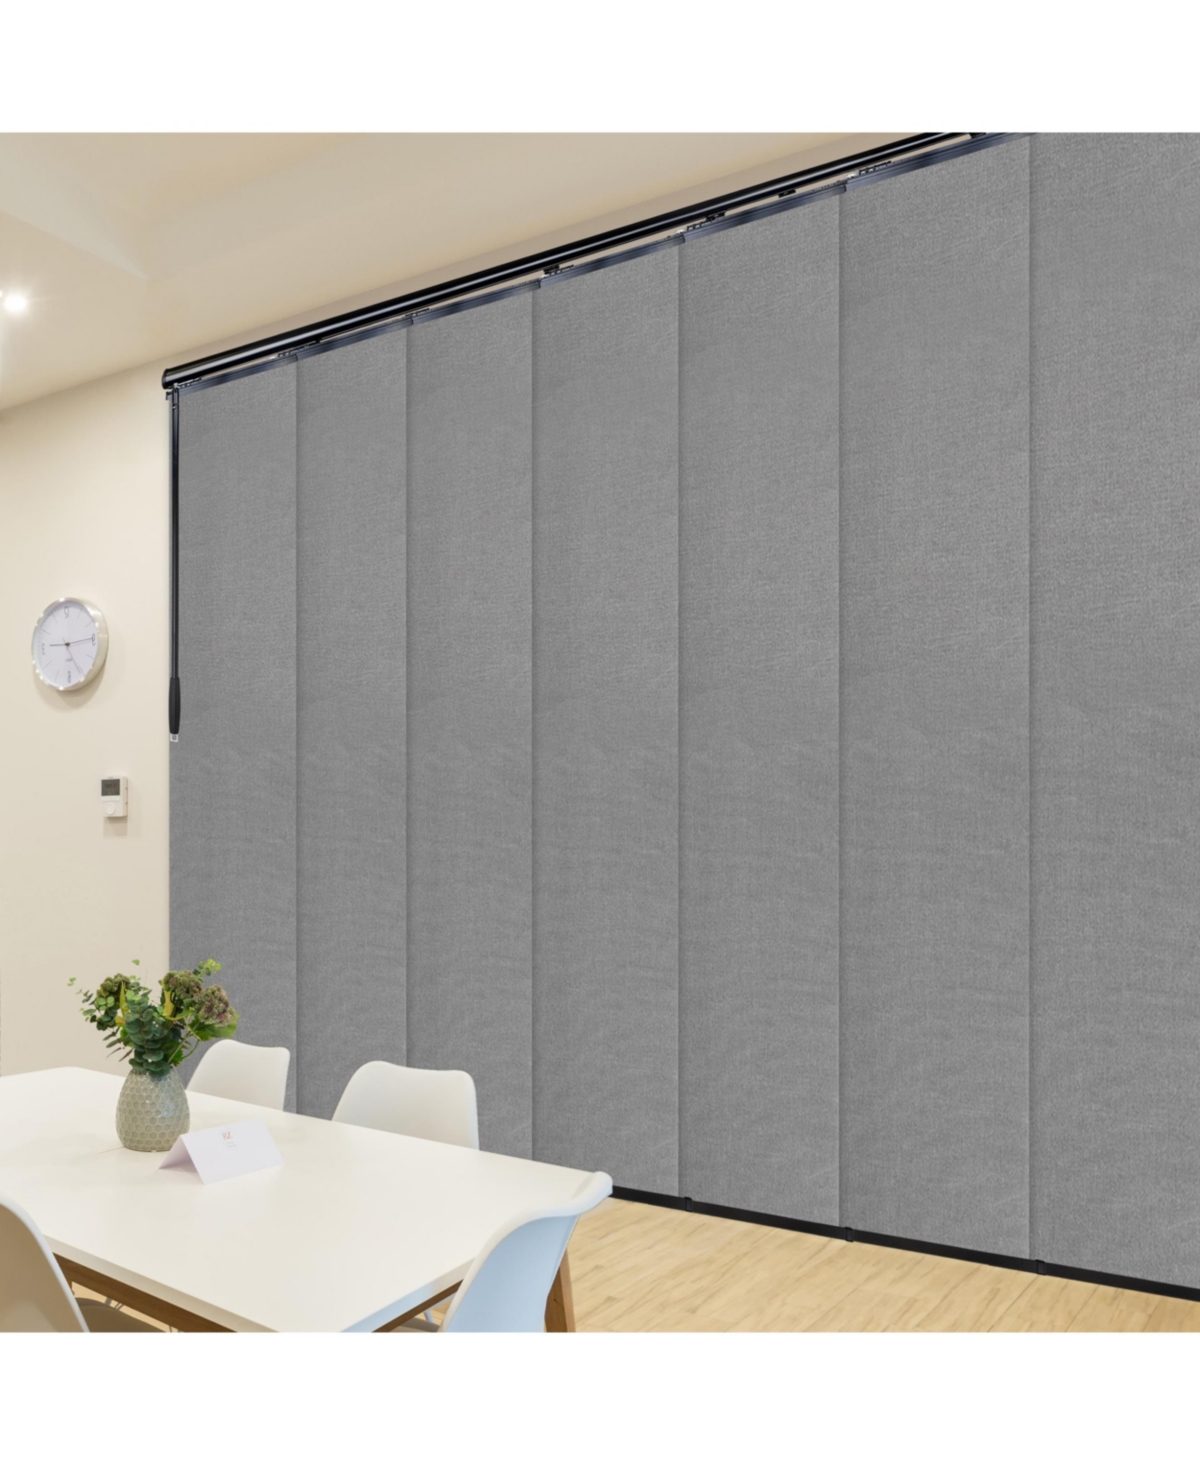 Rod Desyne Woven Gray Blinds 7-panel Single Rail Panel Track Extendable 110"-153"w X 94"h, Panel Width 23.5" In Black